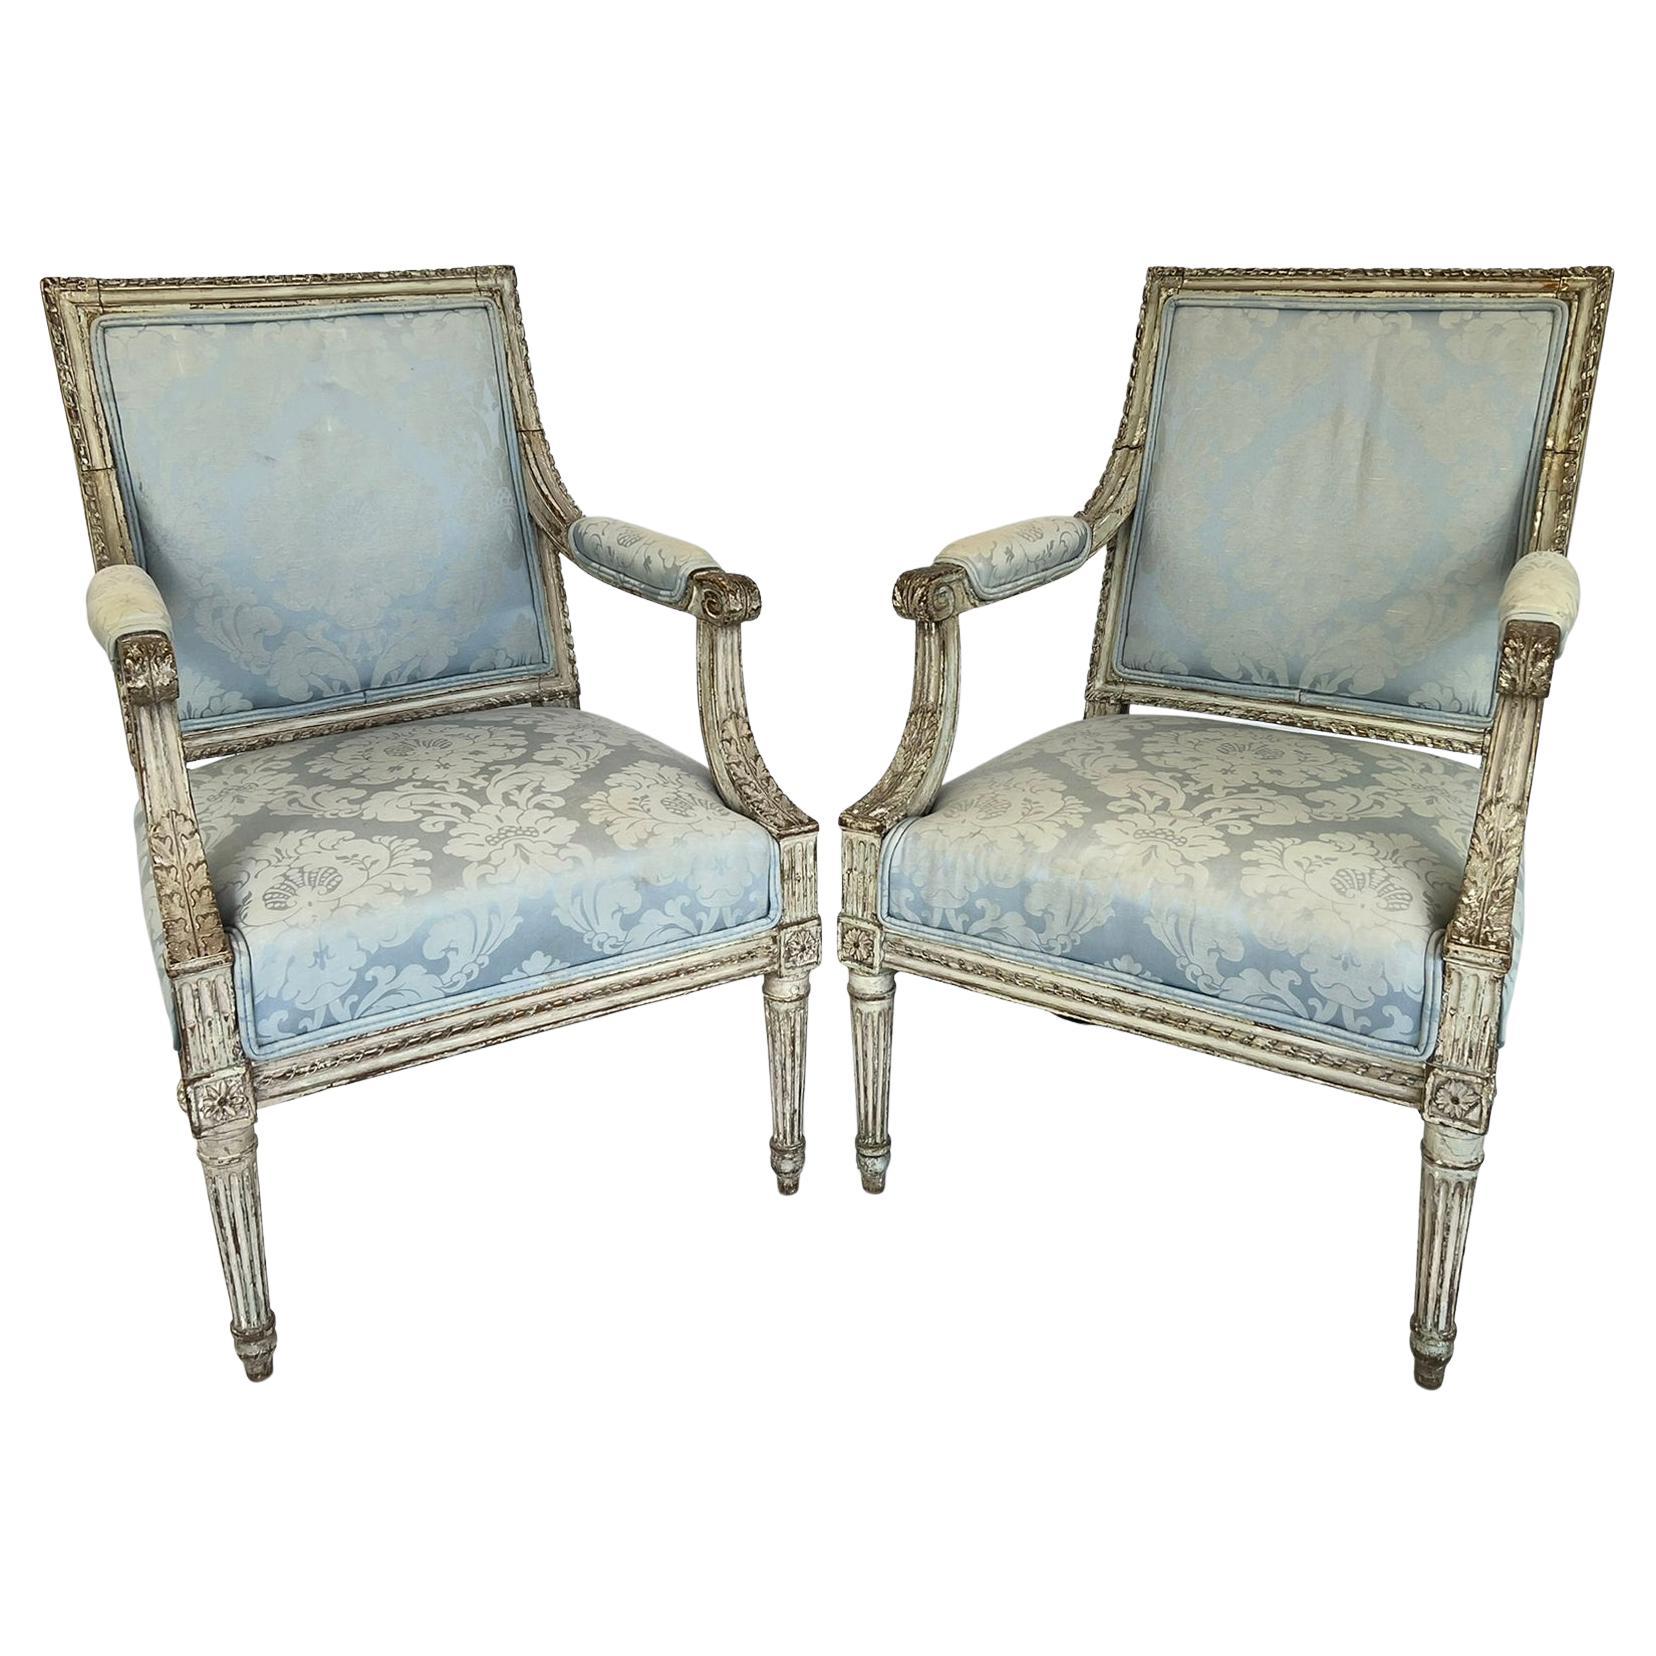 Pair of 18th/19th Century French Carved Fauteuils